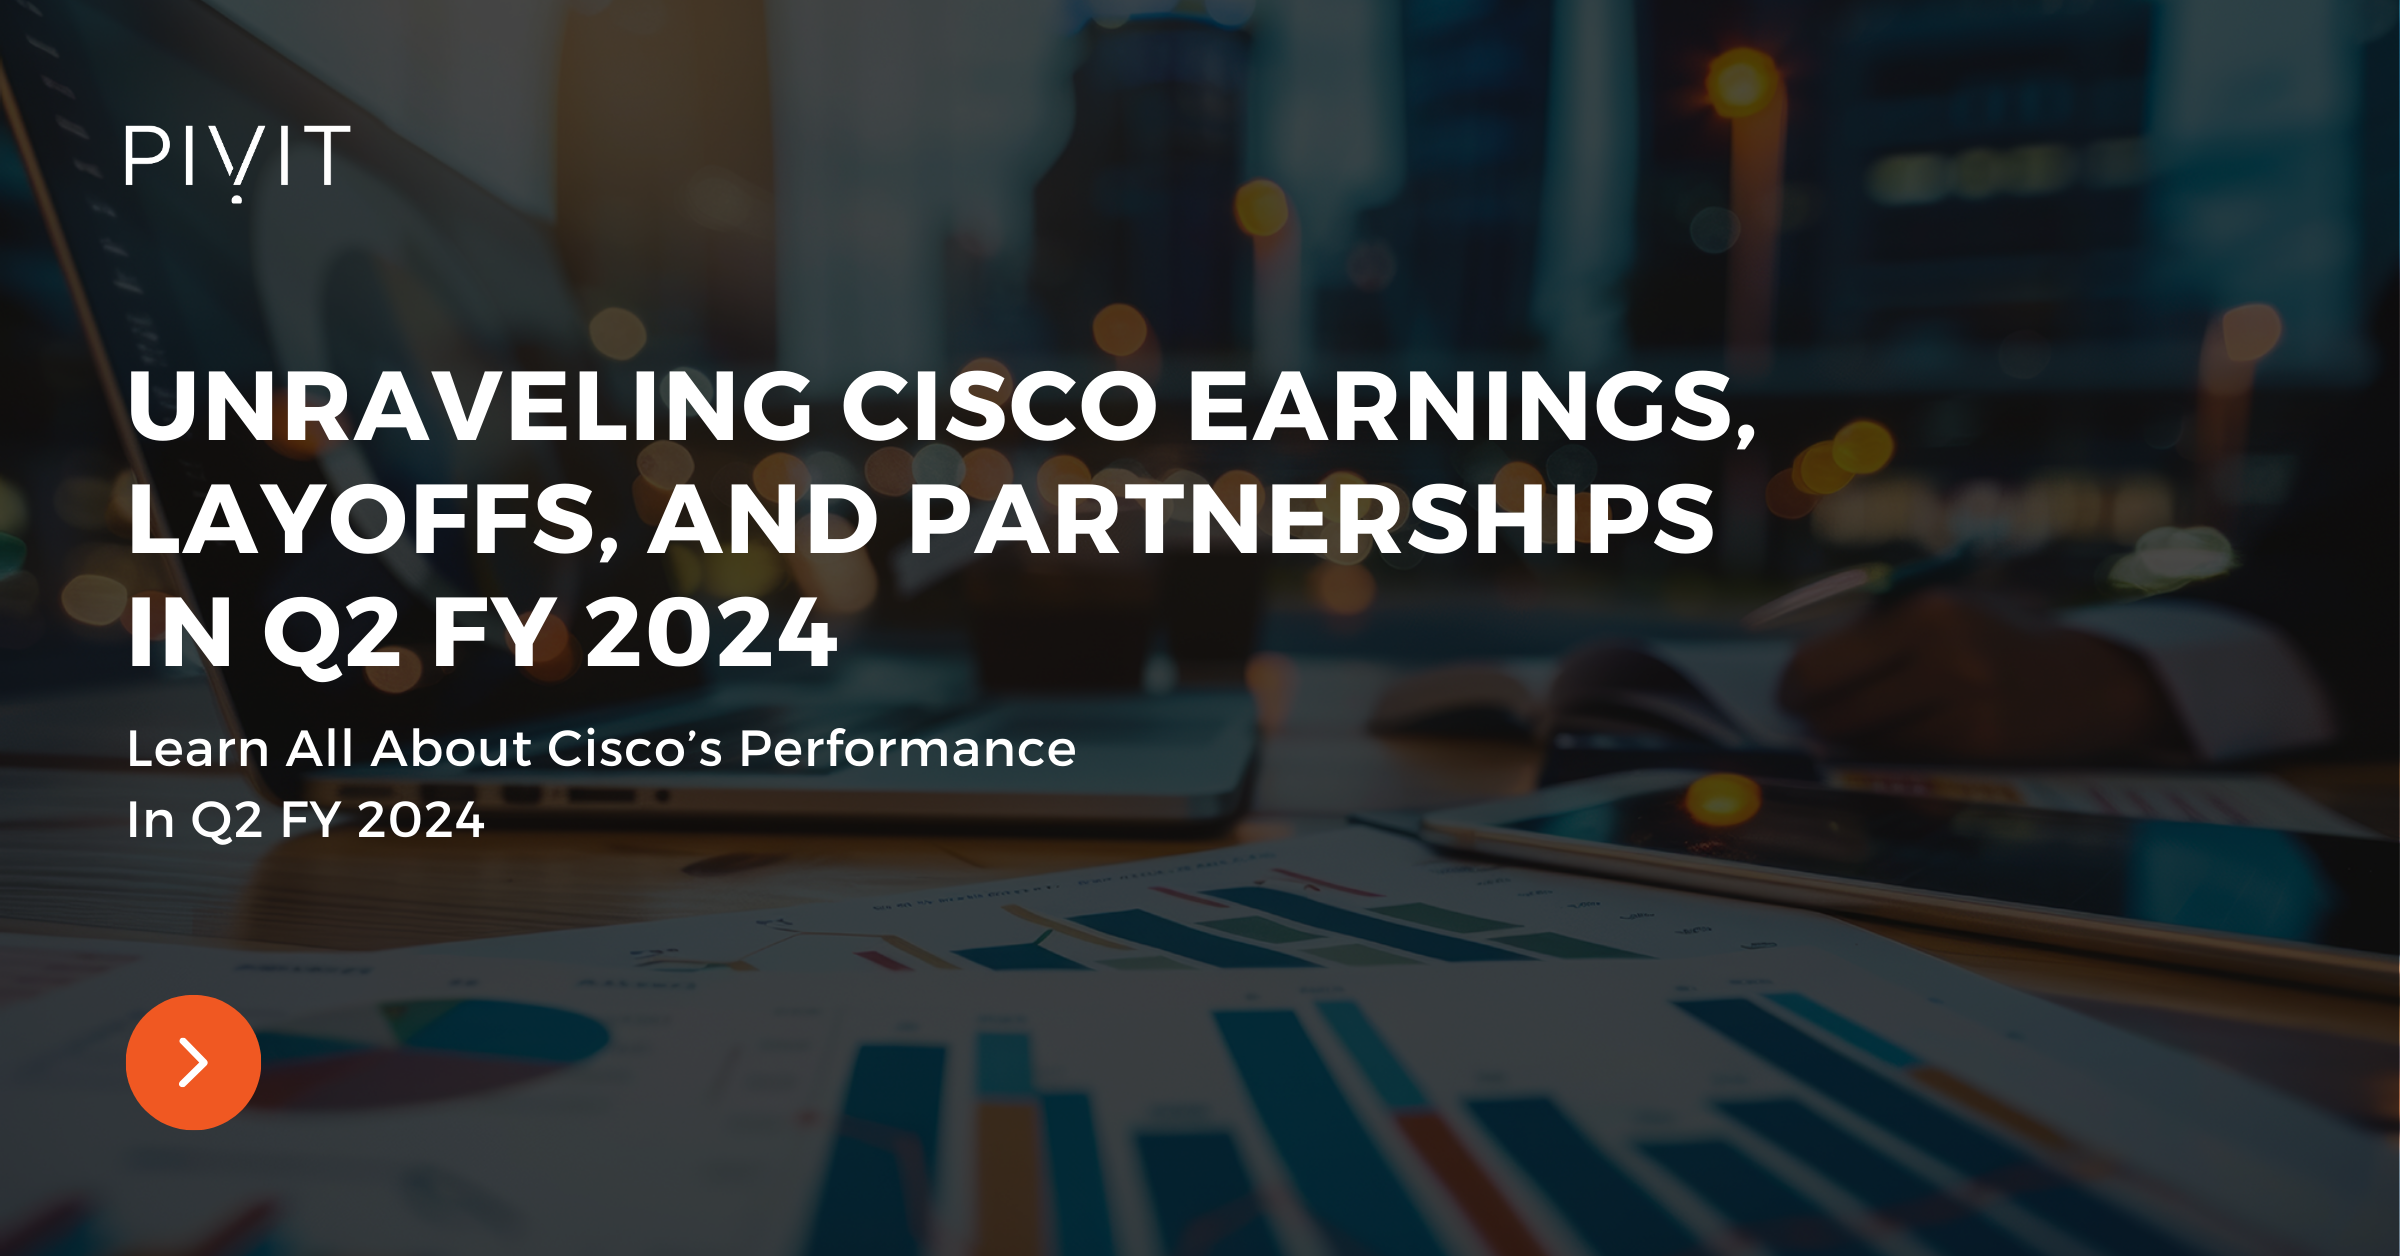 Unraveling Cisco Earnings, Layoffs, And Partnerships In Q2 FY 2024 - Learn All About Cisco’s Performance In Q2 FY 2024